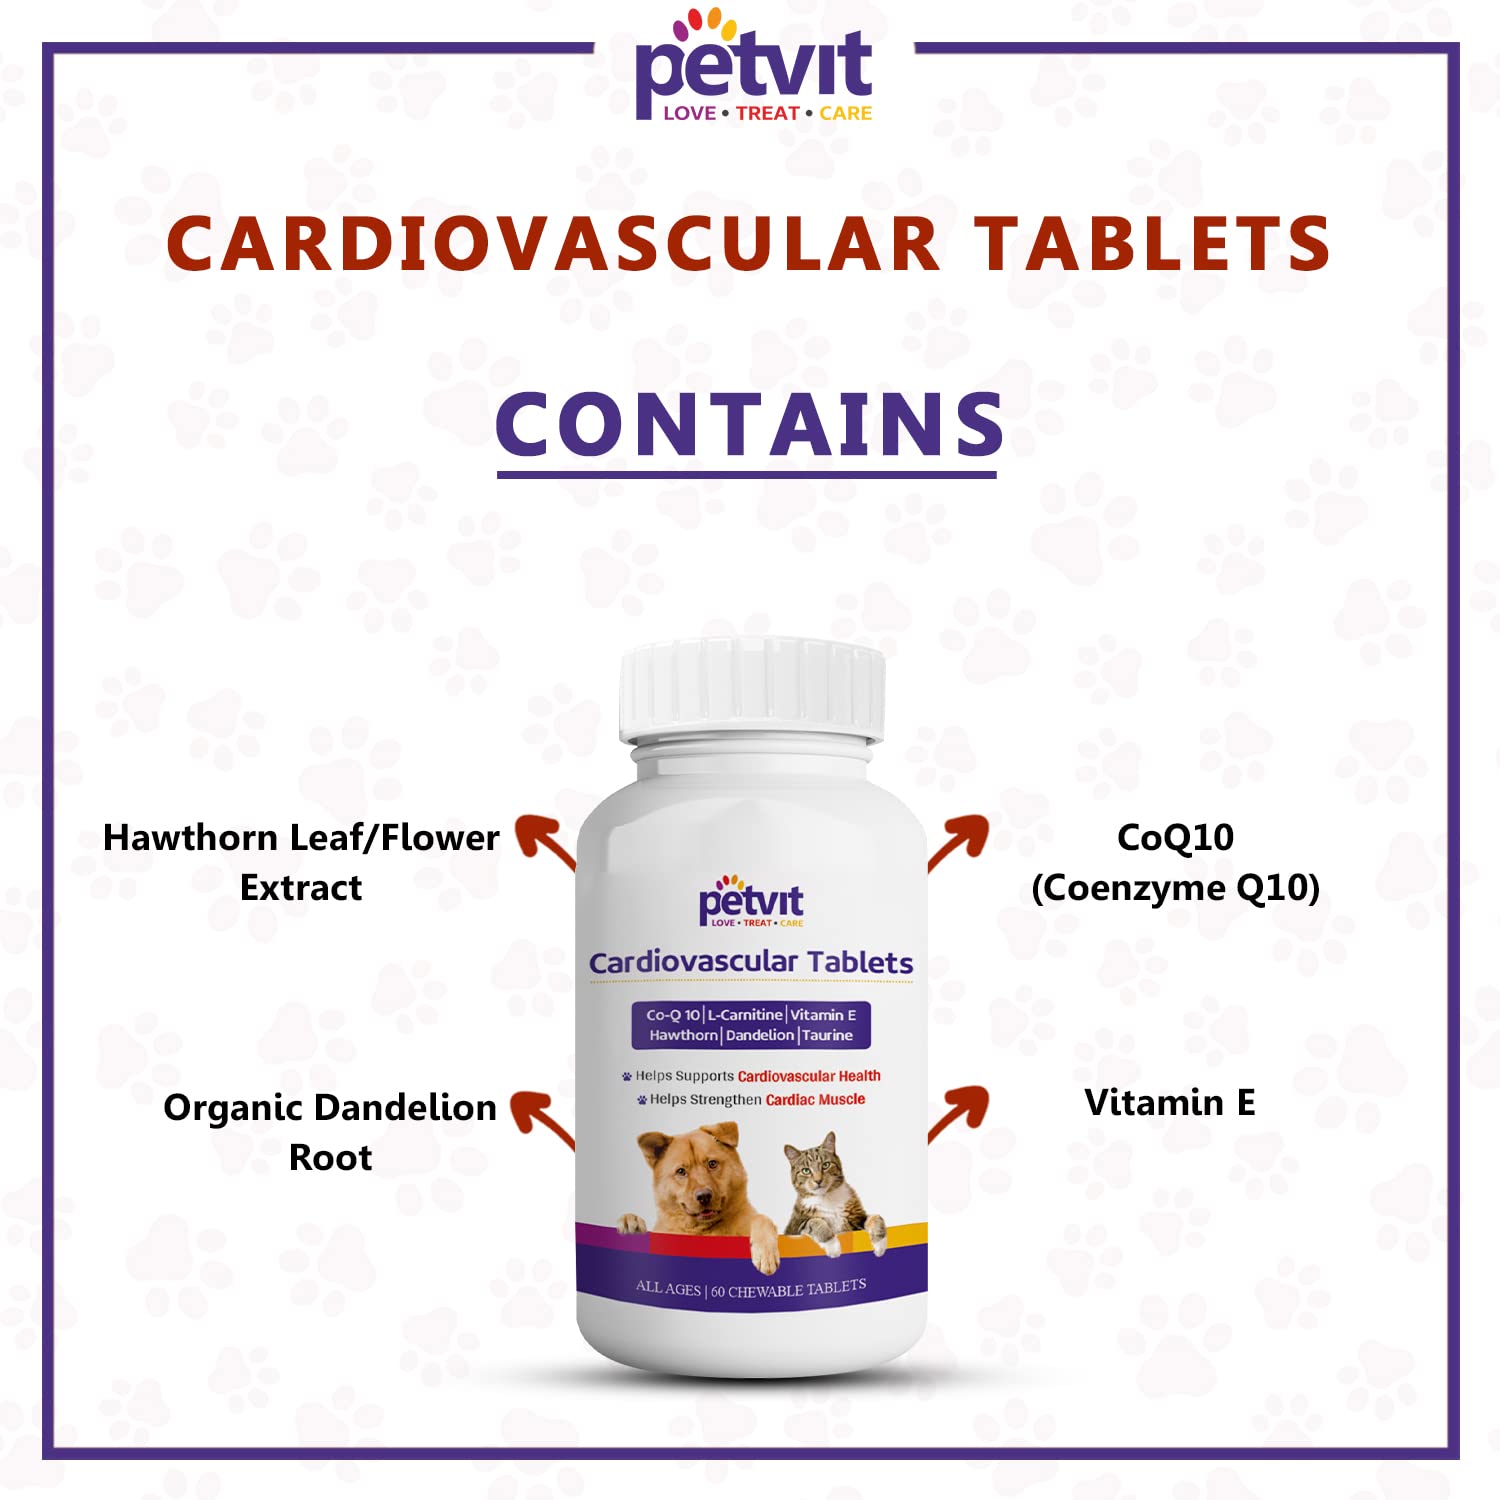 Petvit Cardiovascular Tablets | Coenzyme Q-10 Dog & Cat Supplements | Pet Health Supplement for Dogs & Cats | Supports Cardiovascular System | All Breeds of Dogs & Cats – 60 Chewable Tablets